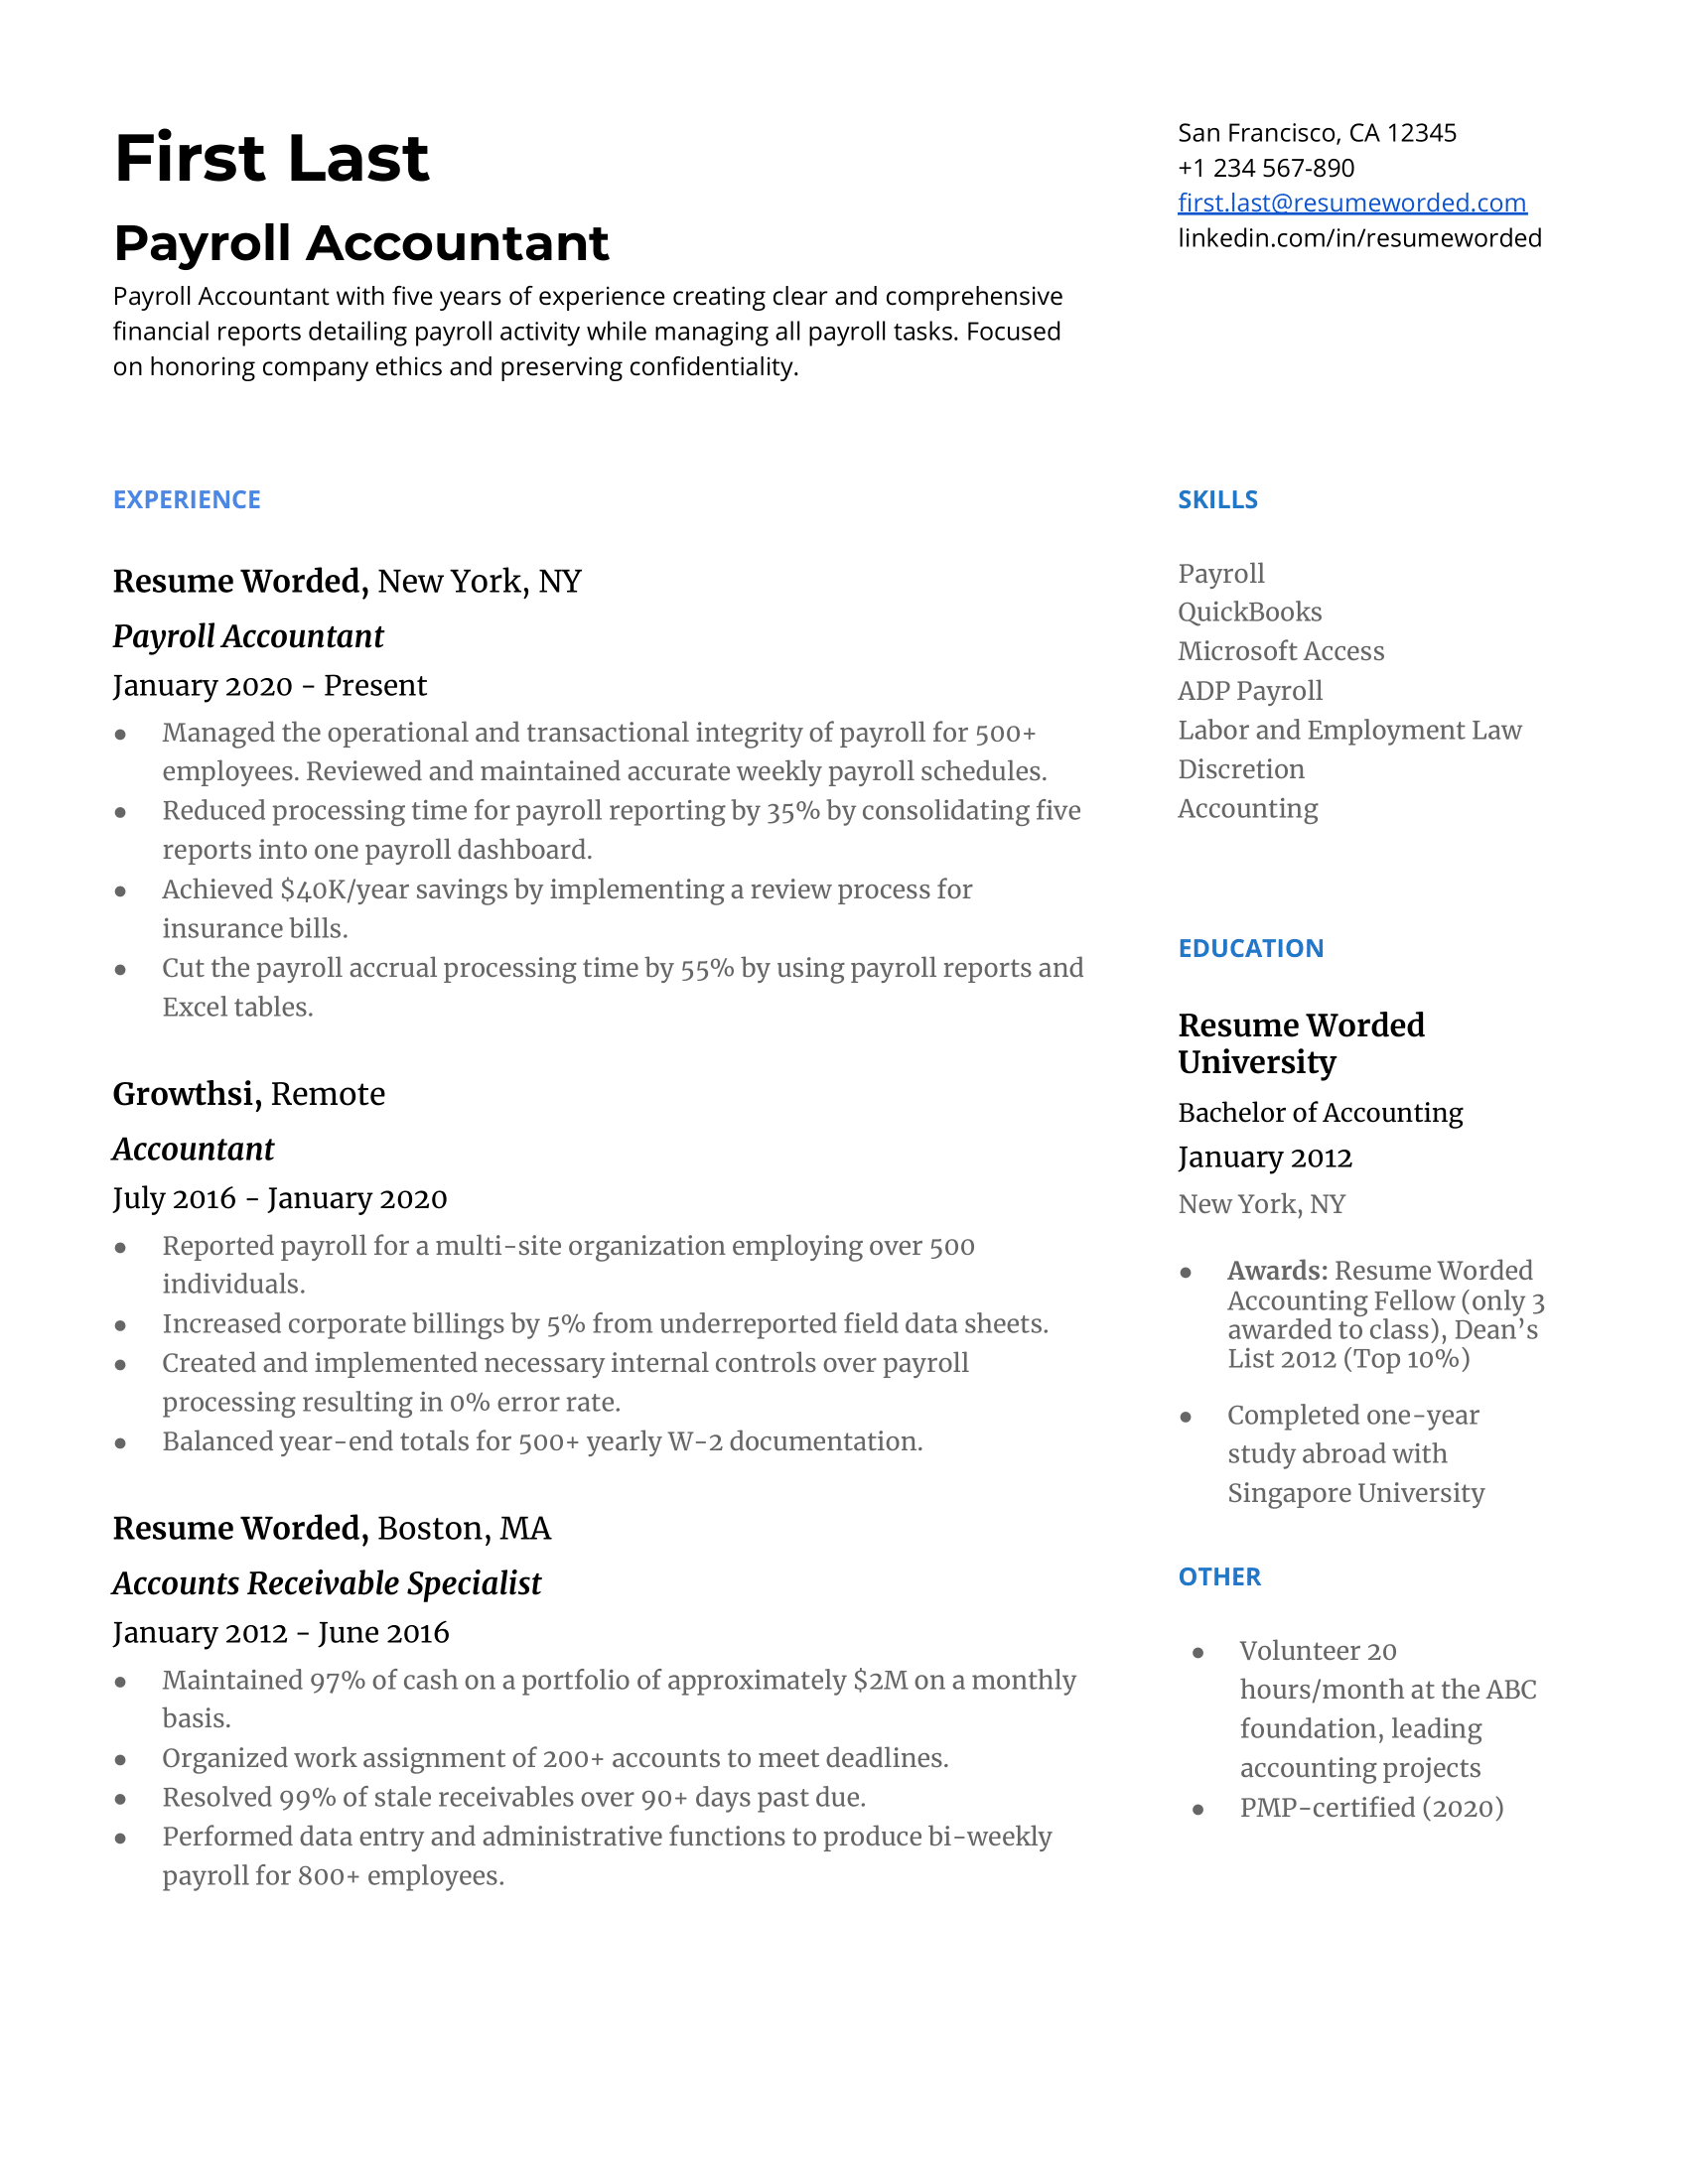 Snapshot of a well-structured Payroll Accountant CV.